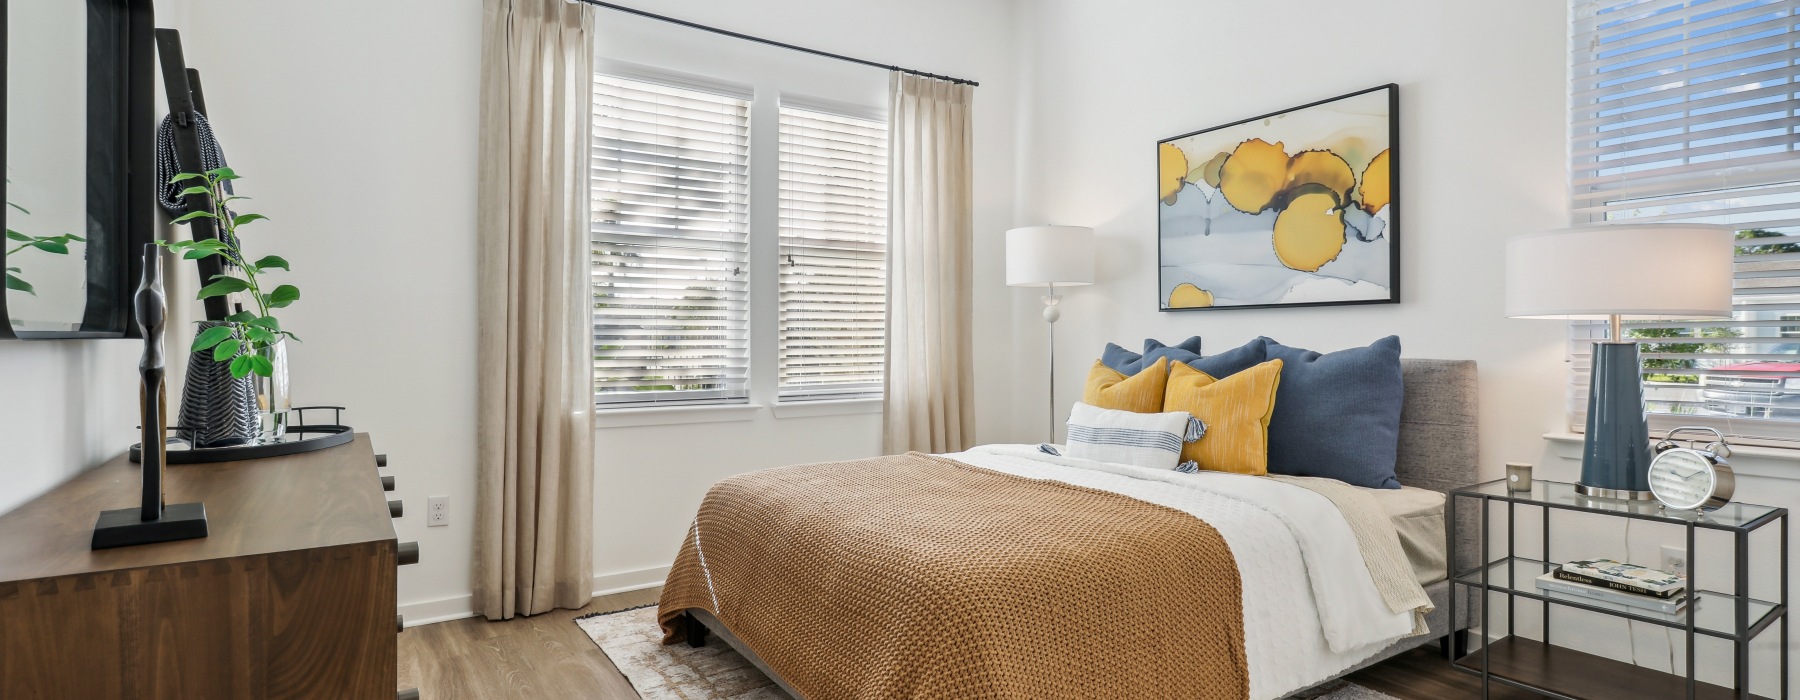 Modernly furnished rental home bedrooms at The Tides at Waterside